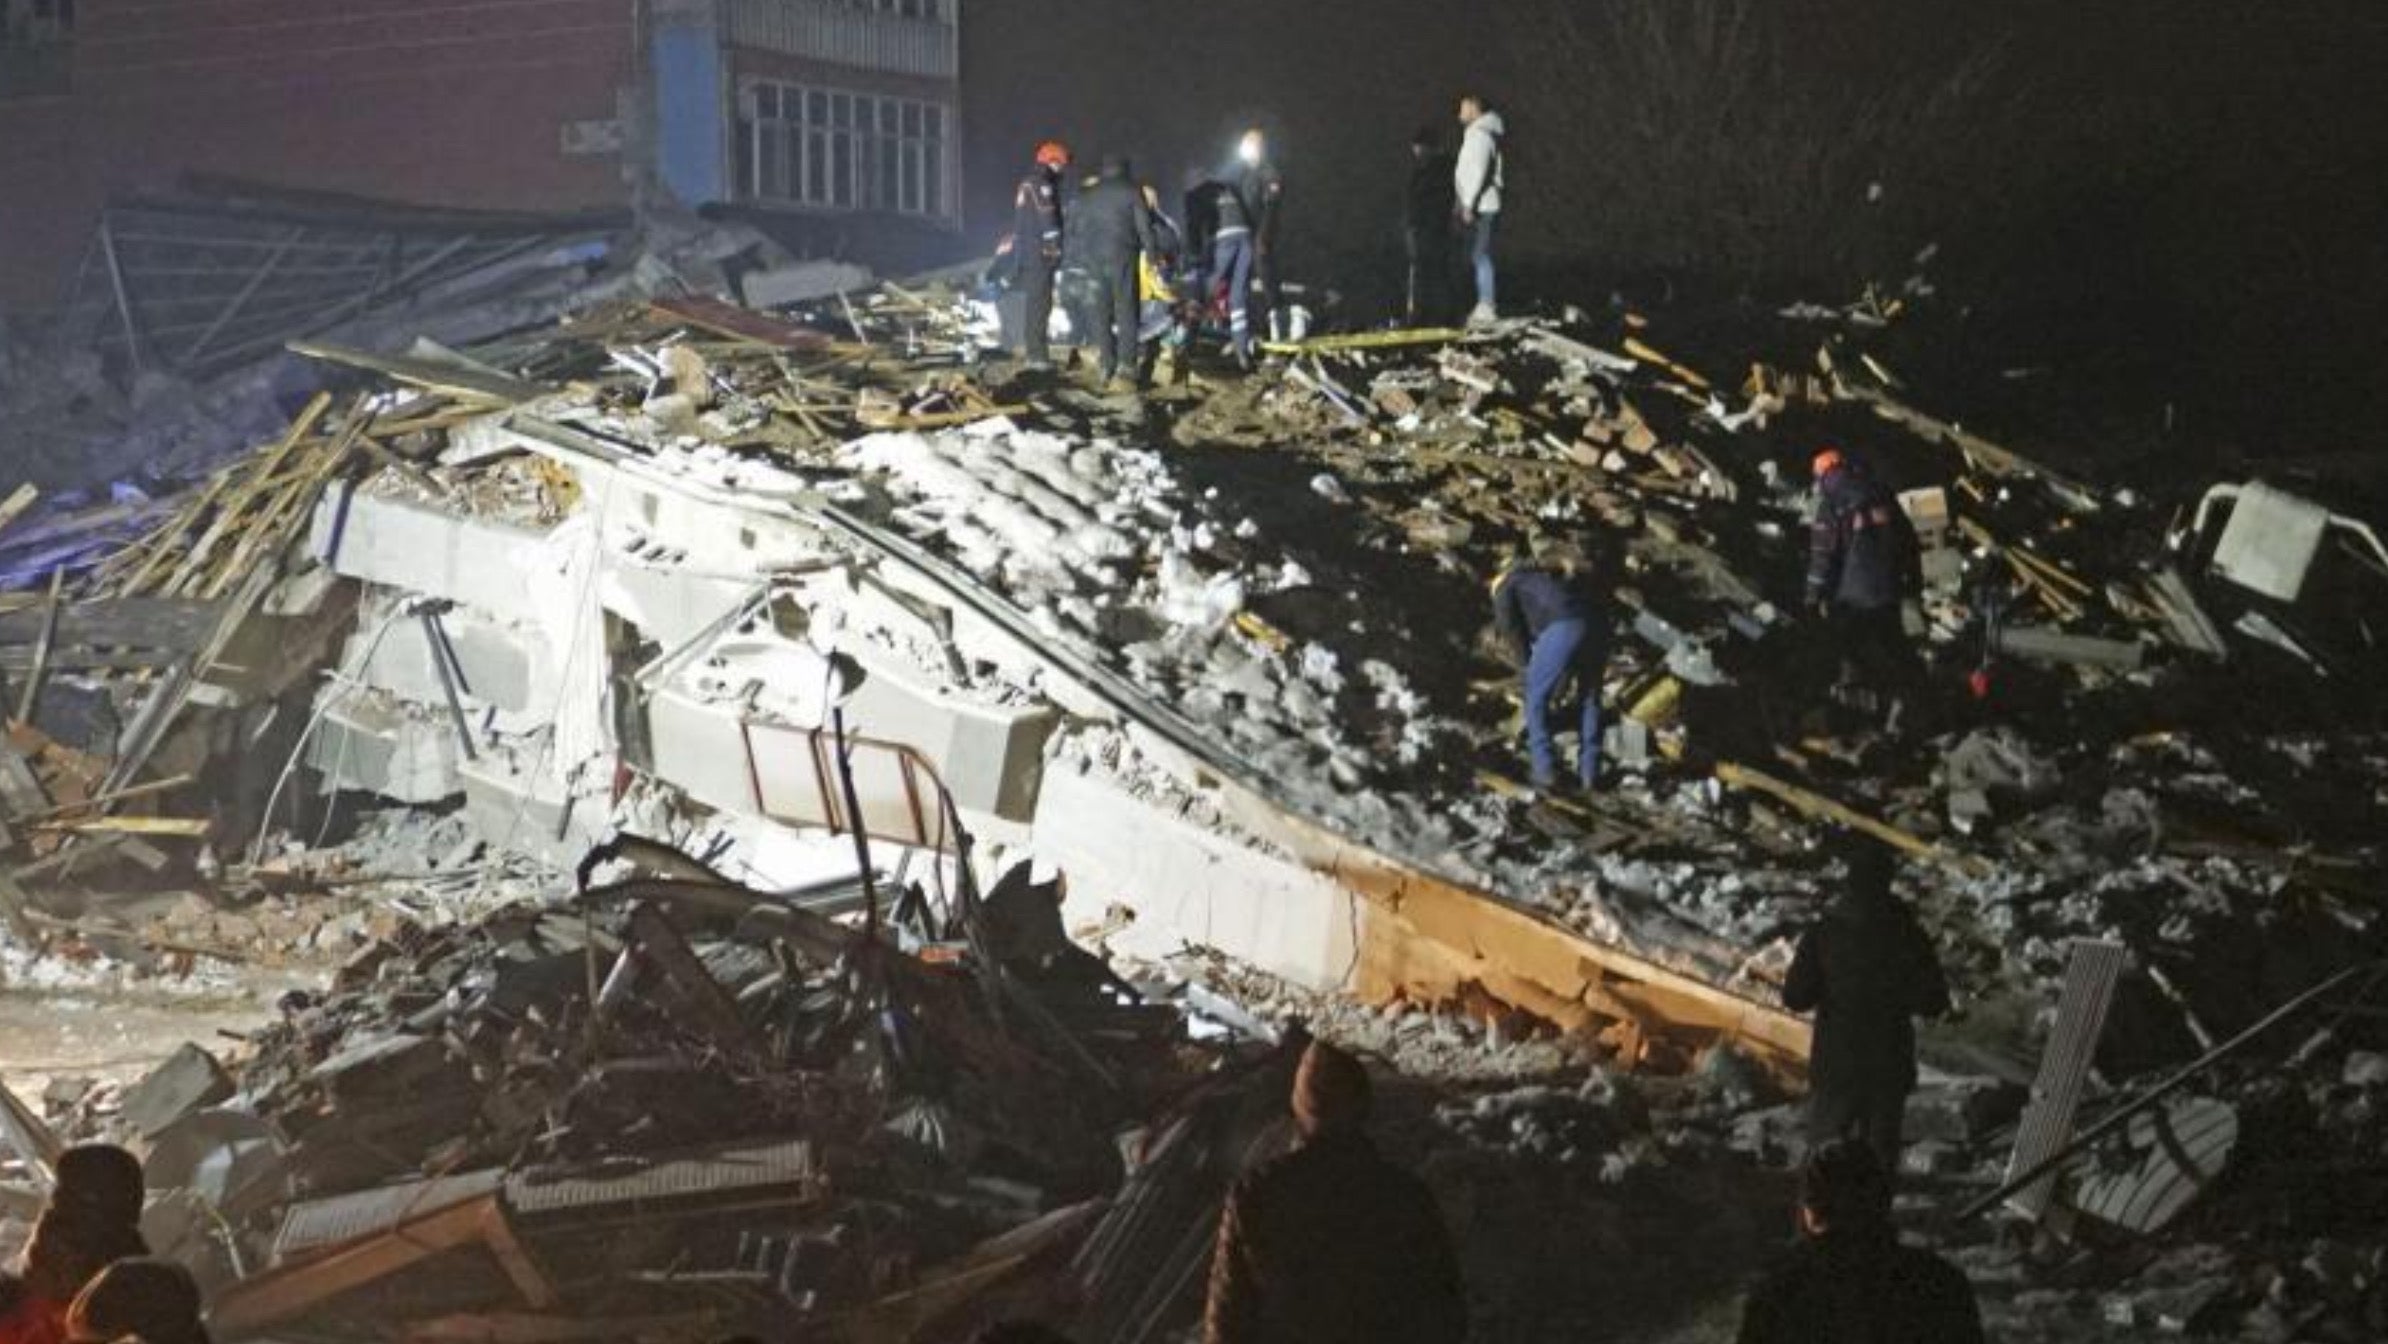 A new earthquake of magnitude 5.6 shakes Turkey on Tuesday, the provisional death toll rises to 4,500, Magnate Daily